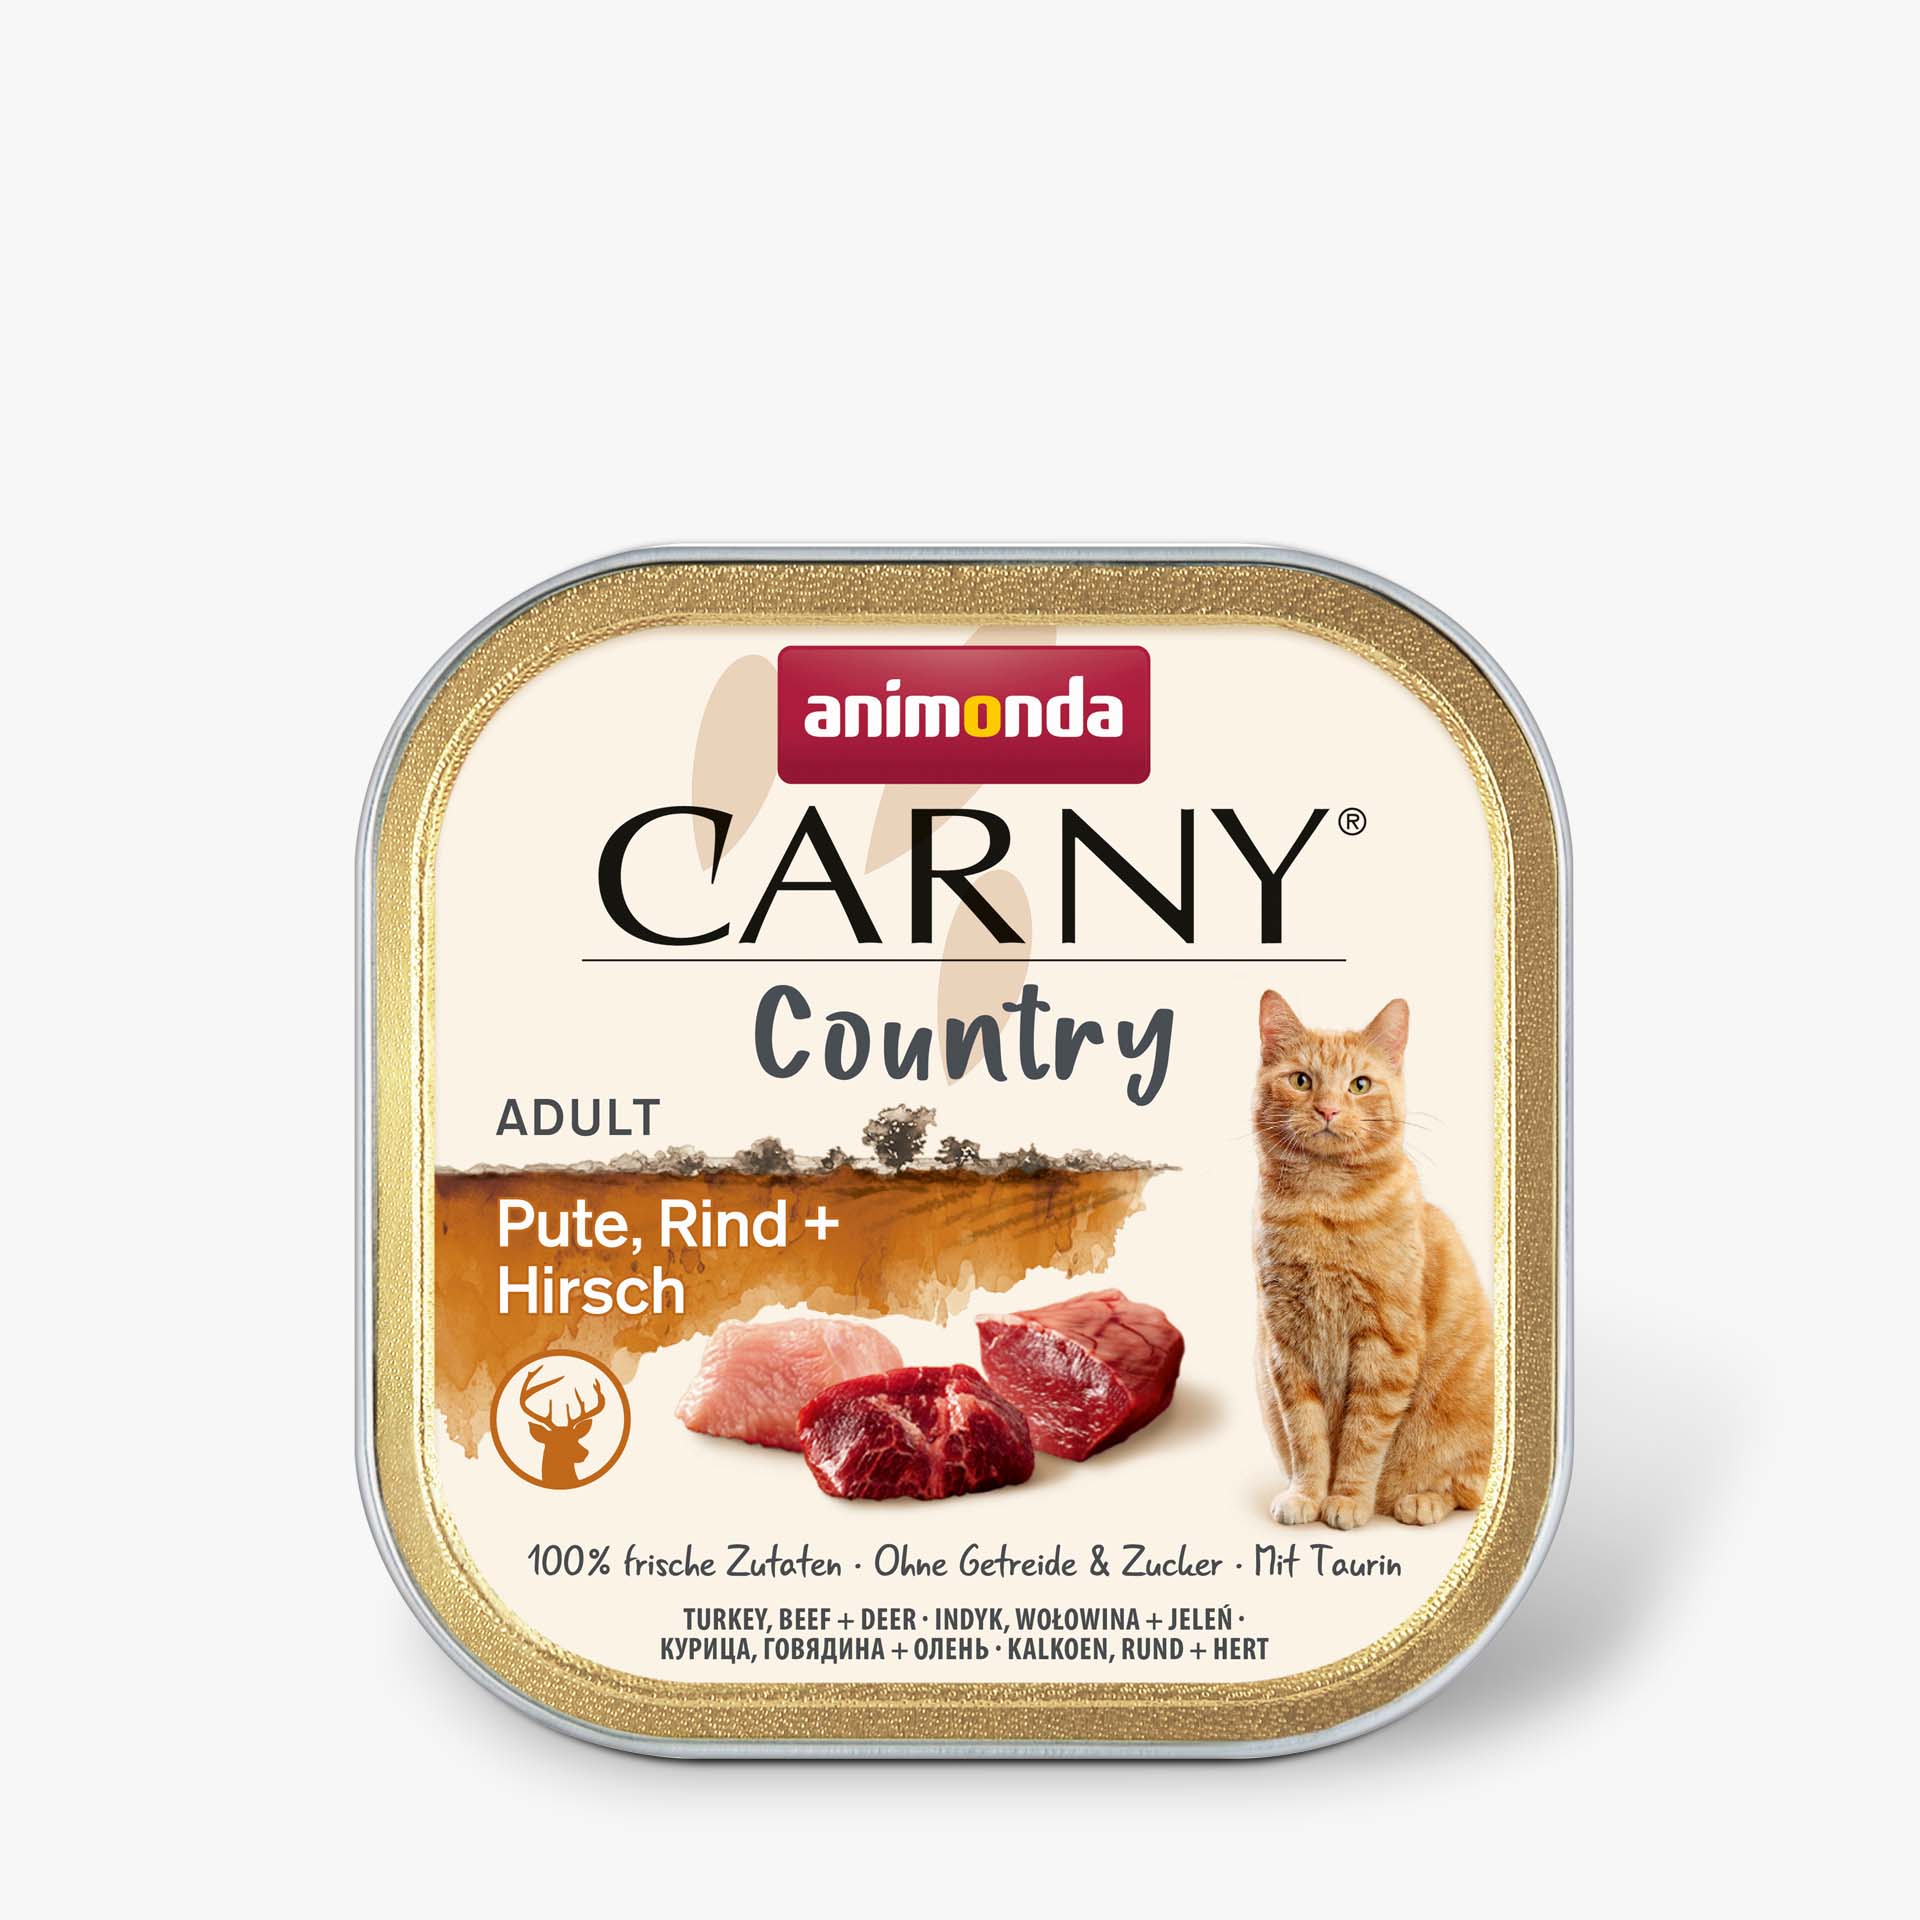 Carny Country Adult Pute, Rind + Hirsch